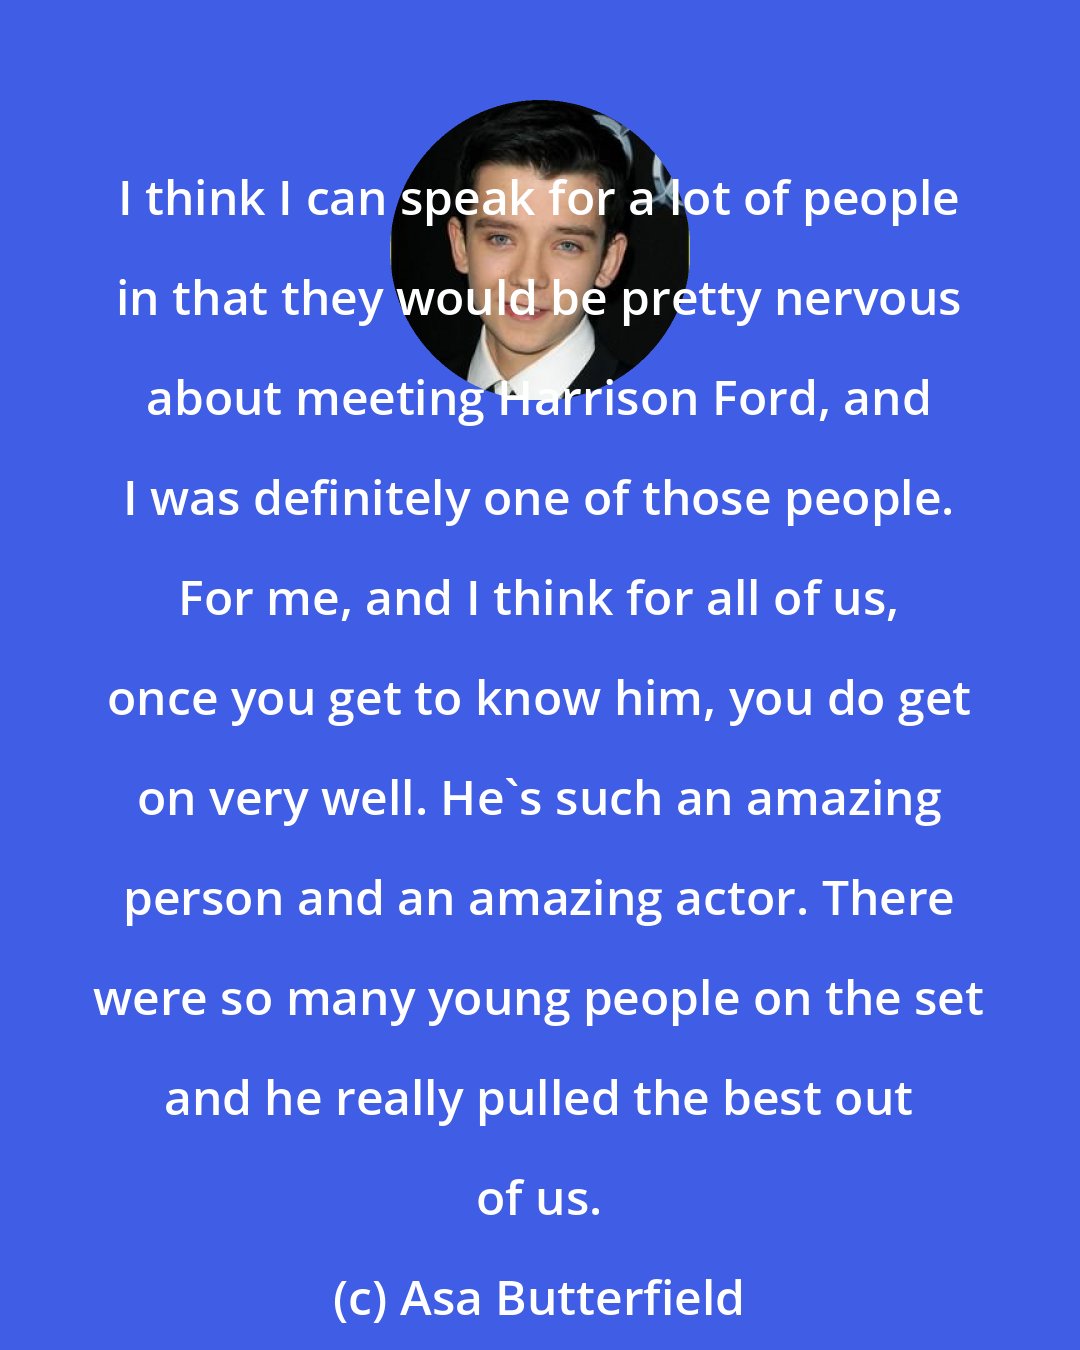 Asa Butterfield: I think I can speak for a lot of people in that they would be pretty nervous about meeting Harrison Ford, and I was definitely one of those people. For me, and I think for all of us, once you get to know him, you do get on very well. He's such an amazing person and an amazing actor. There were so many young people on the set and he really pulled the best out of us.